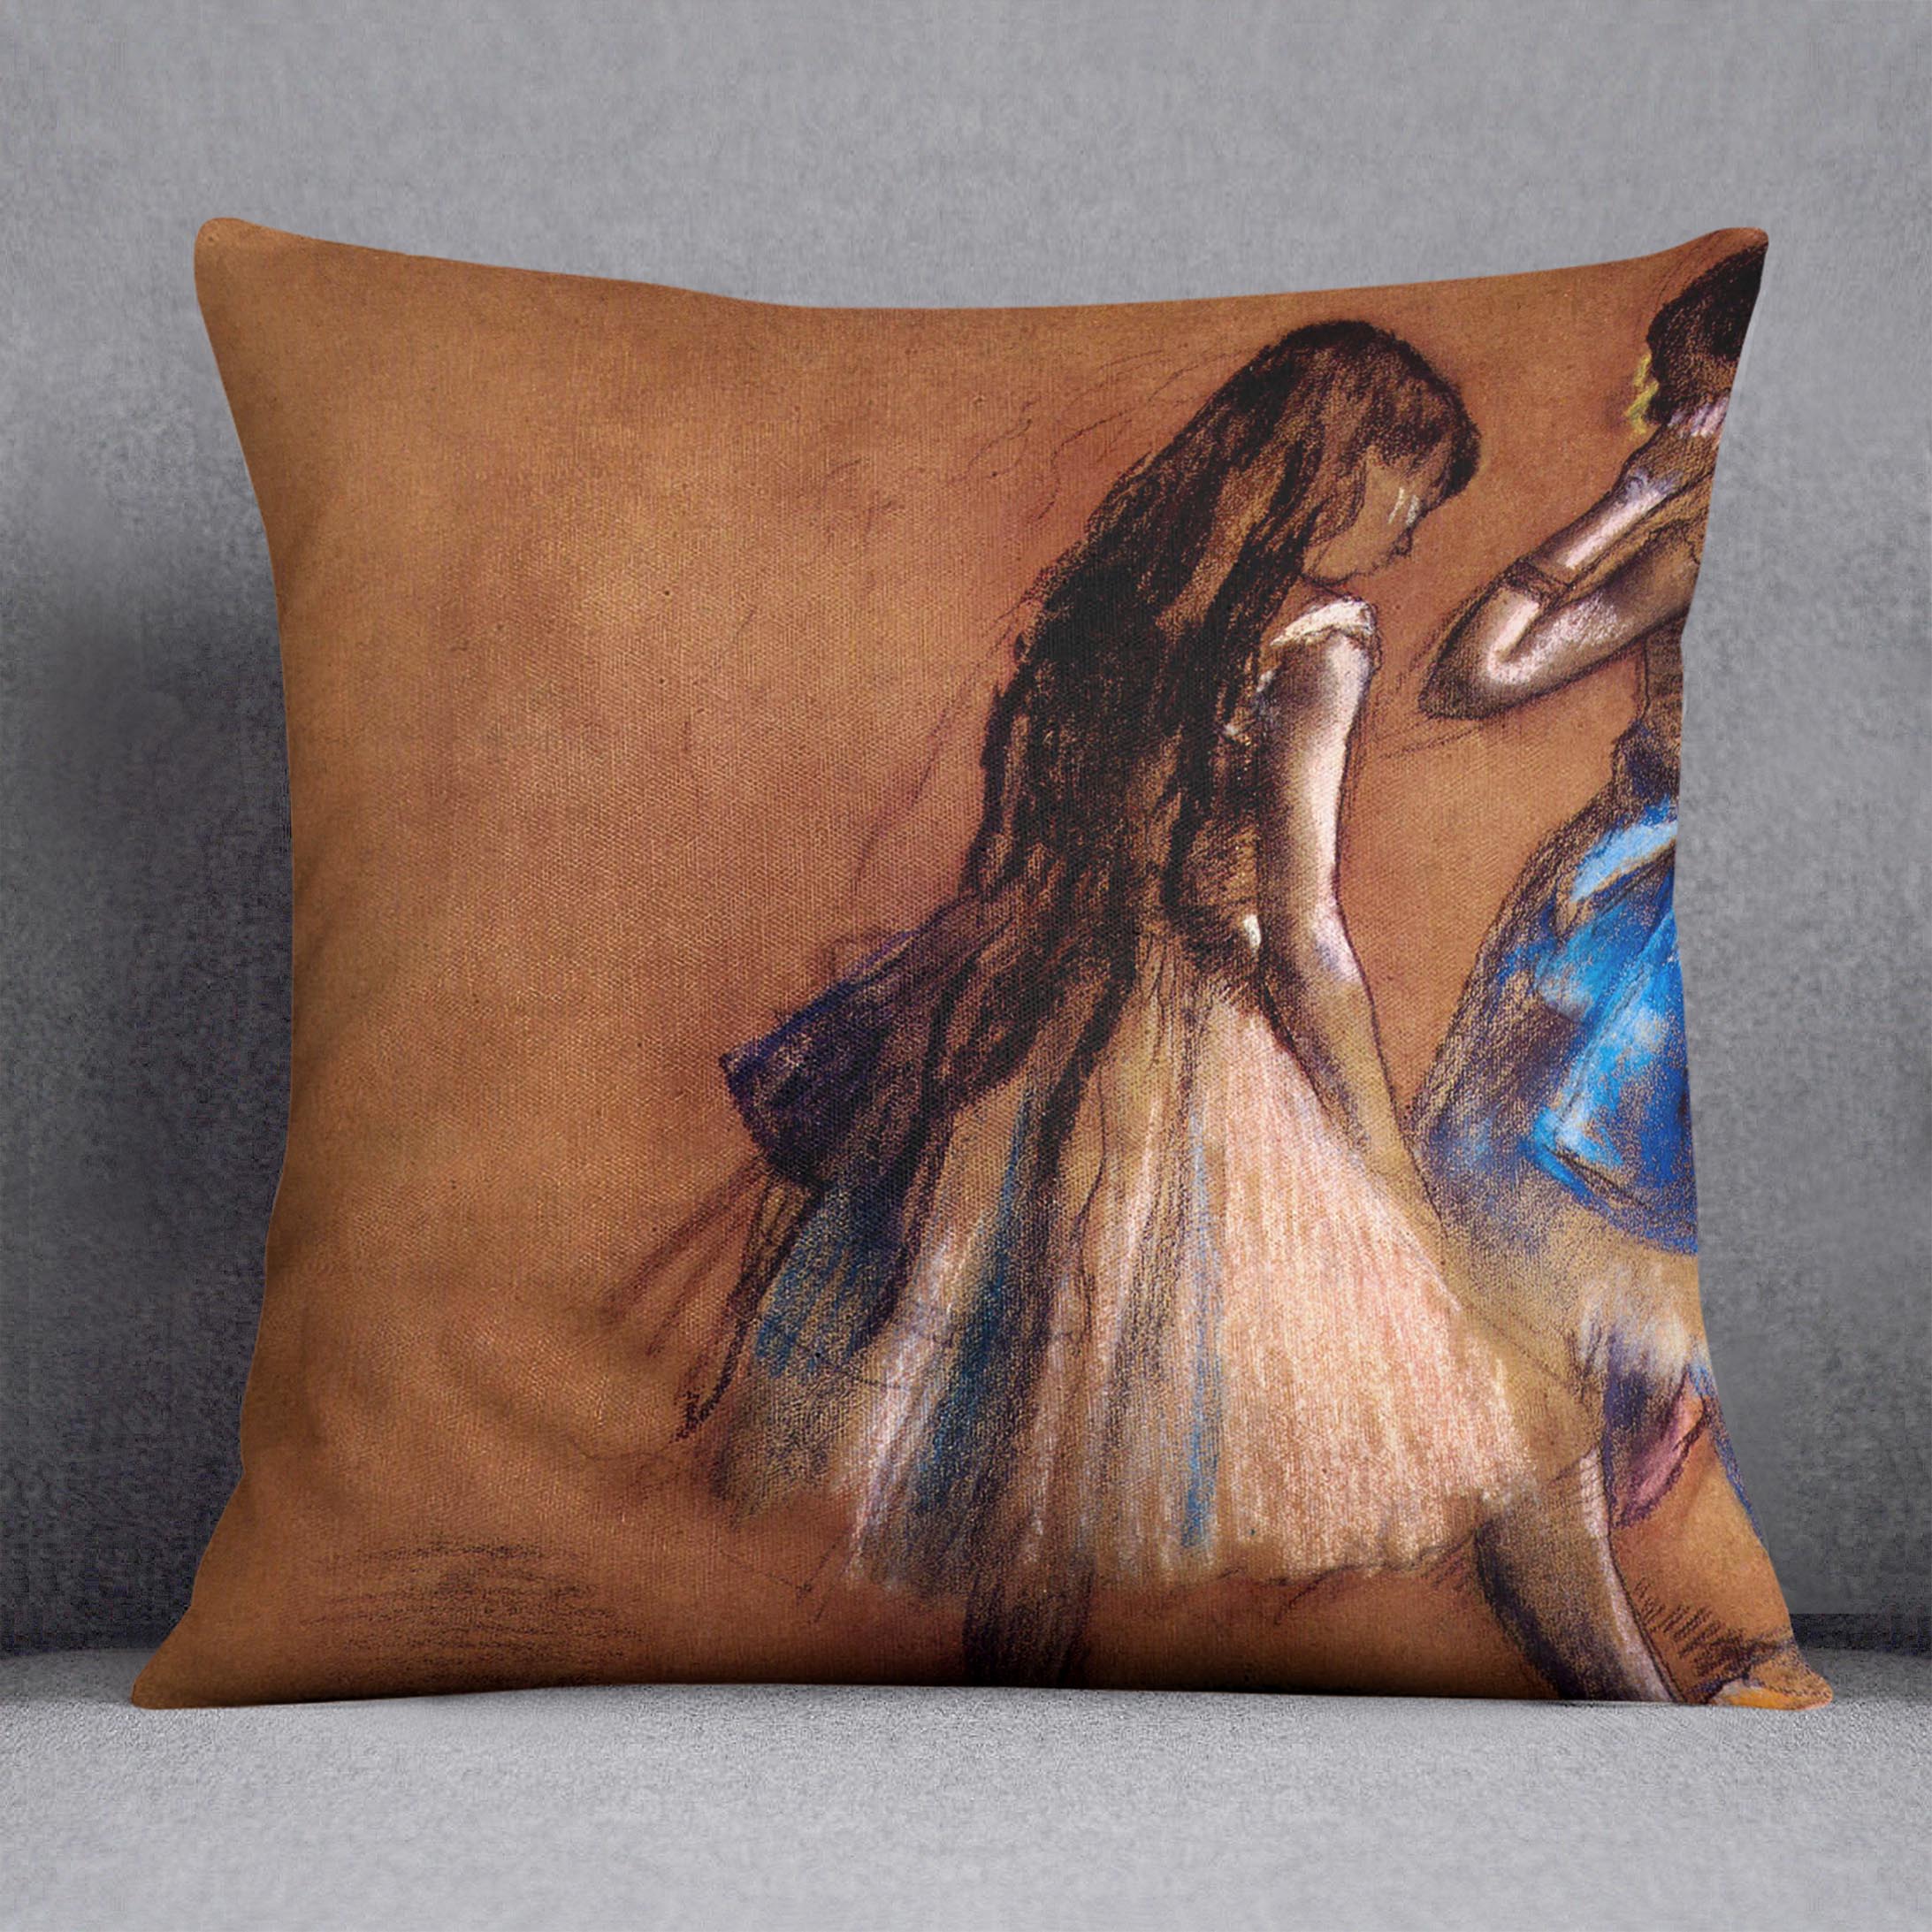 Two dancers 1 by Degas Cushion